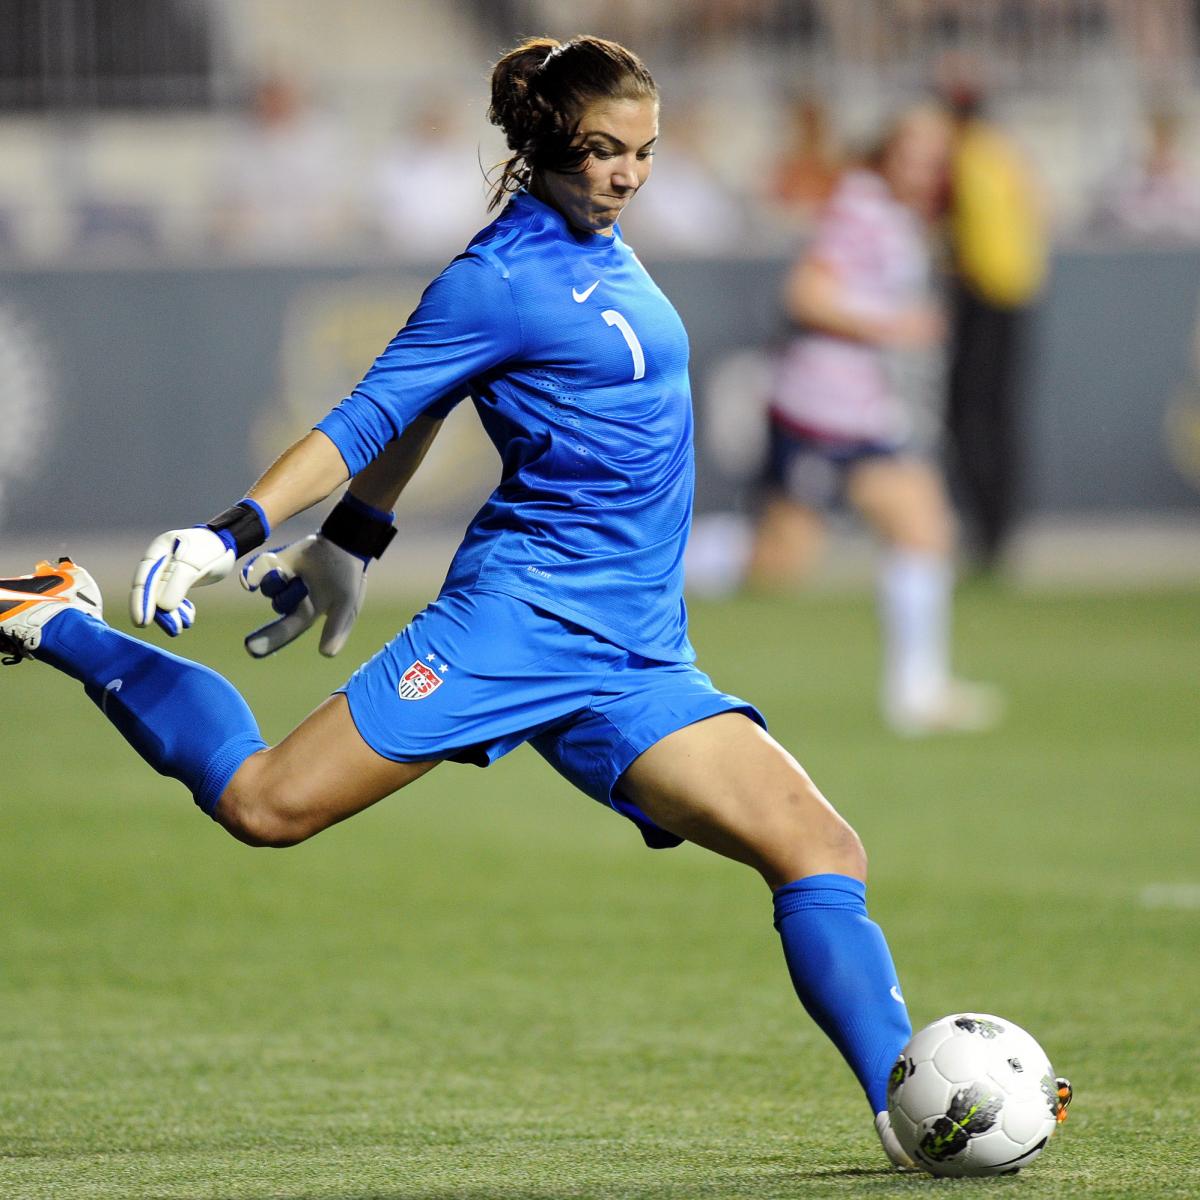 London 2012 Revelations And Reactions From Hope Solo Interview In Espn 